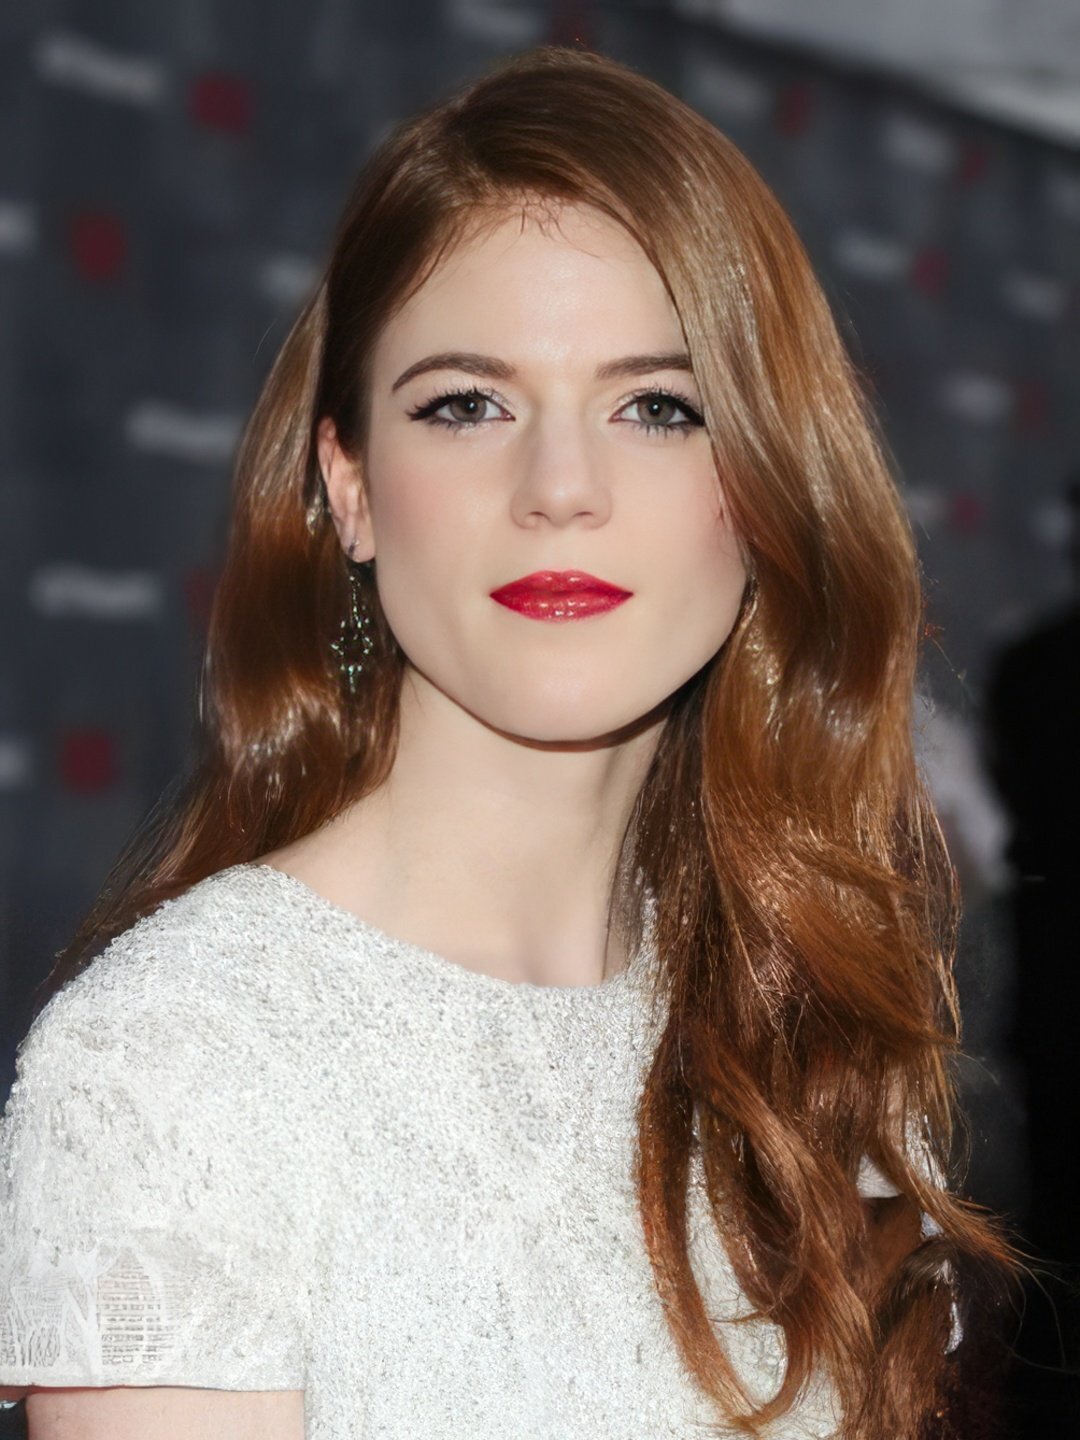 Rose Leslie young pics